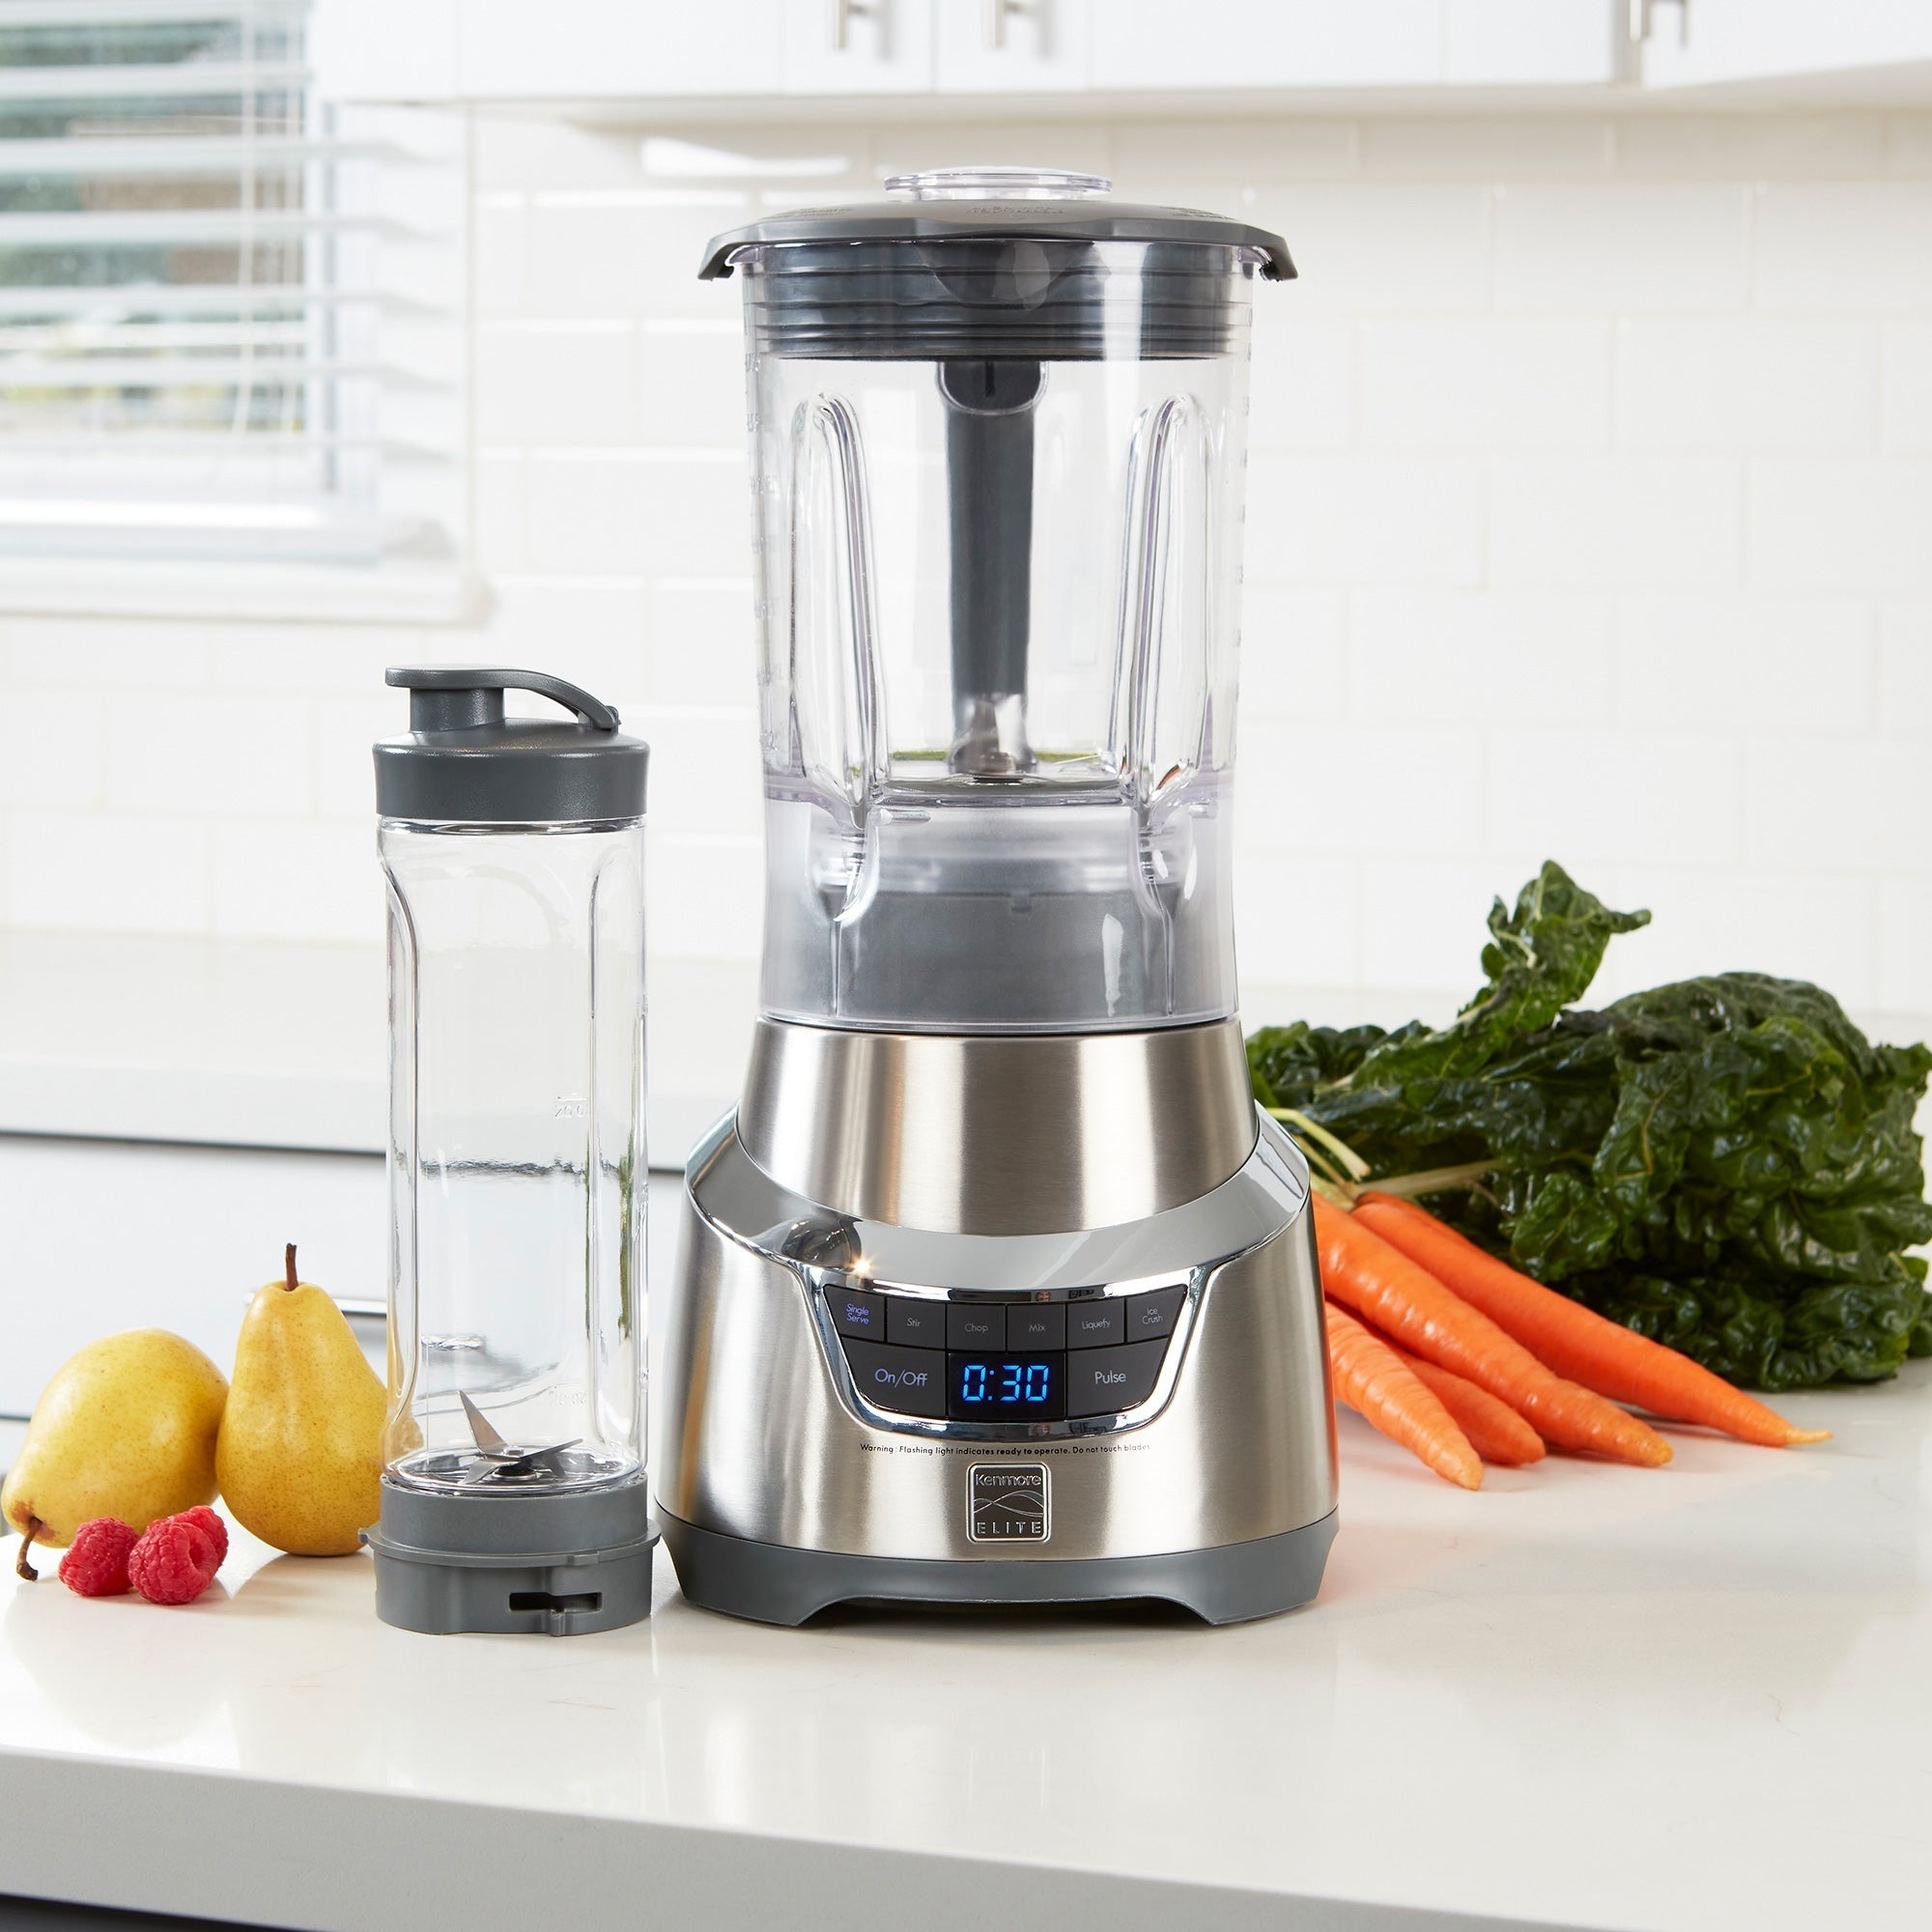 Lifestyle image of Elite 1.3 horsepower blender and travel blending cup empty on white counter with fruits and vegetables beside